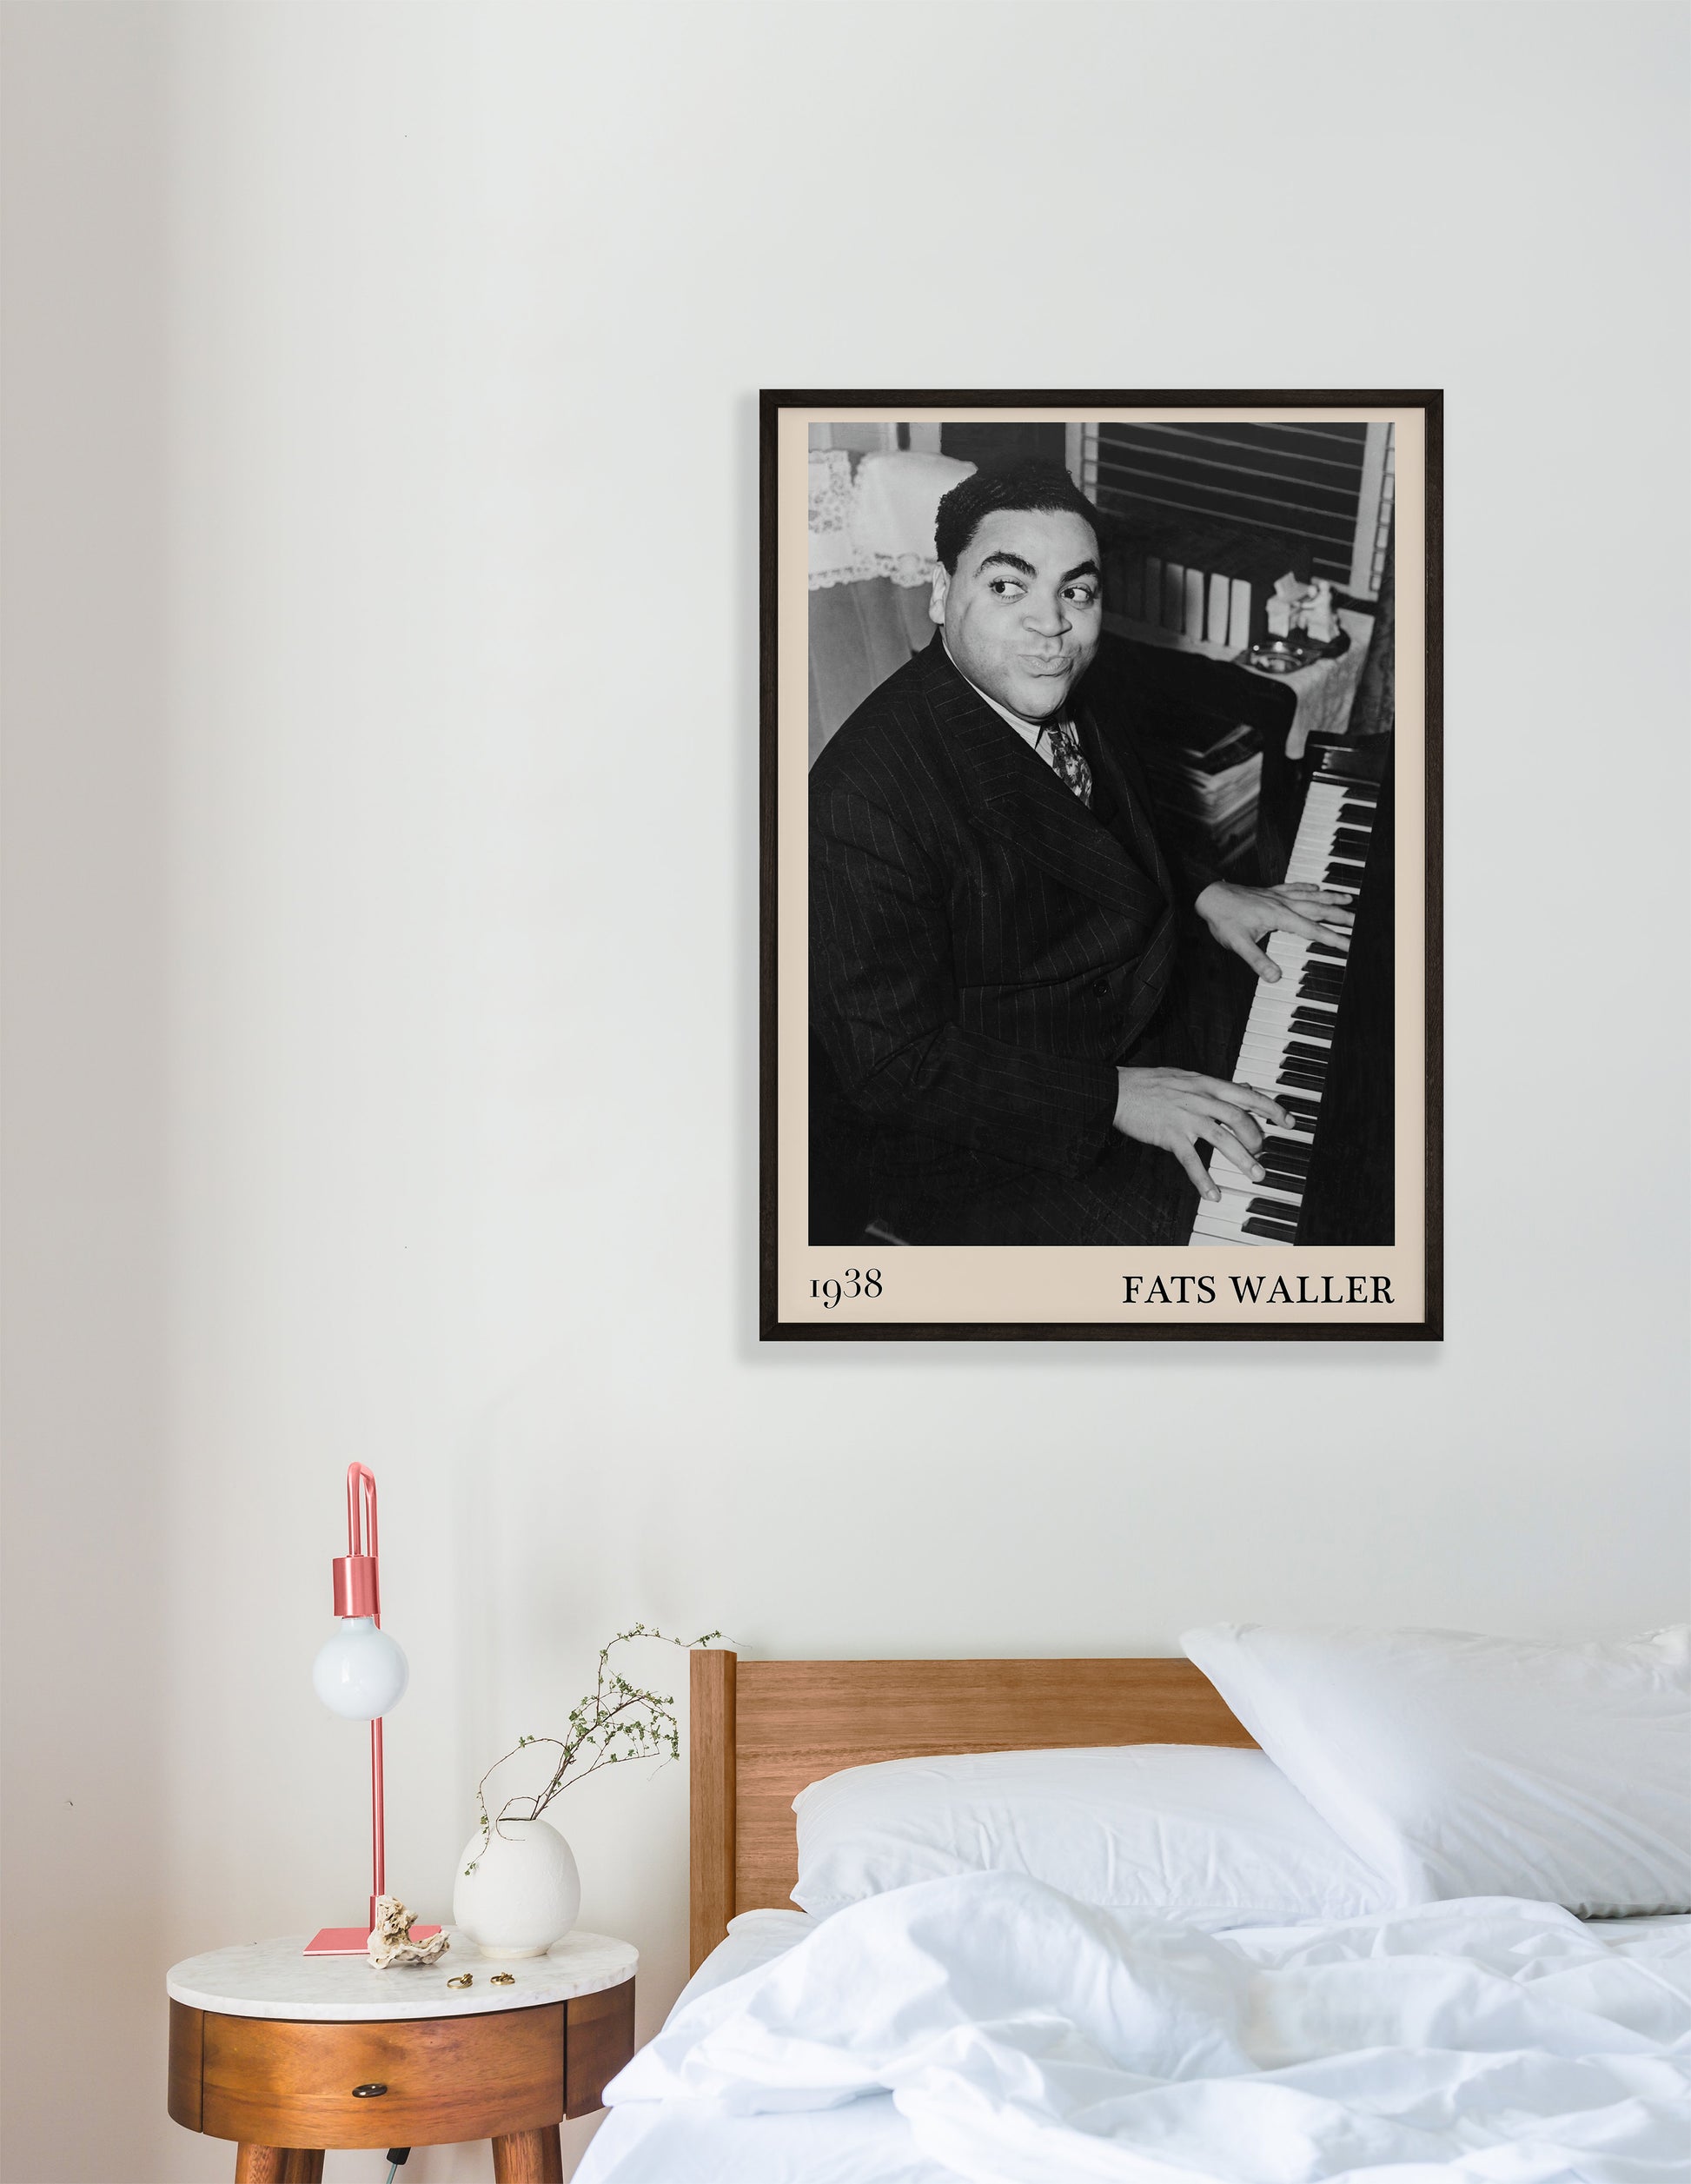 1938 photograph of Fats Waller crafted into a retro black framed art print. The poster is hanging on a white bedroom room wall.